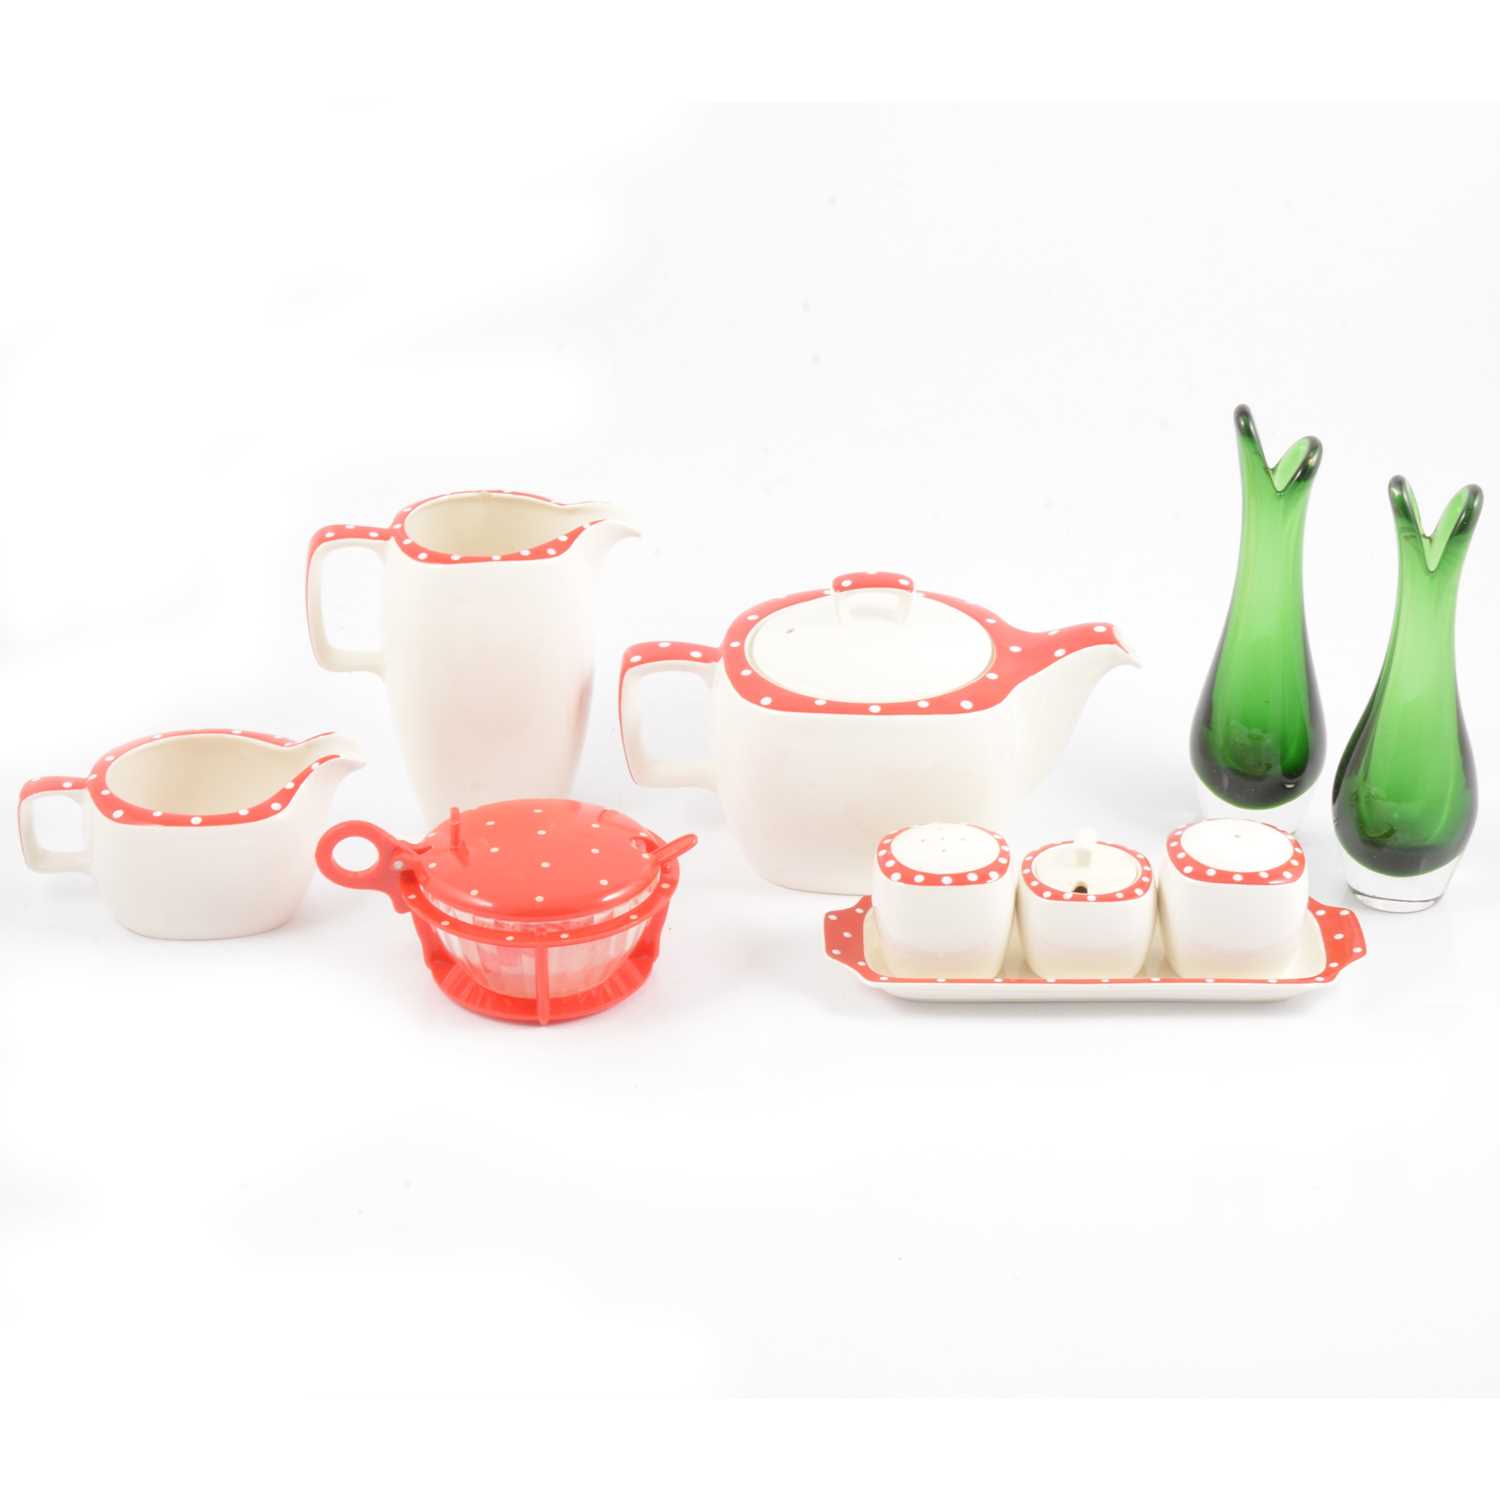 Lot 48 - Midwinter Stylecraft 'Red Domino' pattern part teaset, and glasswares.